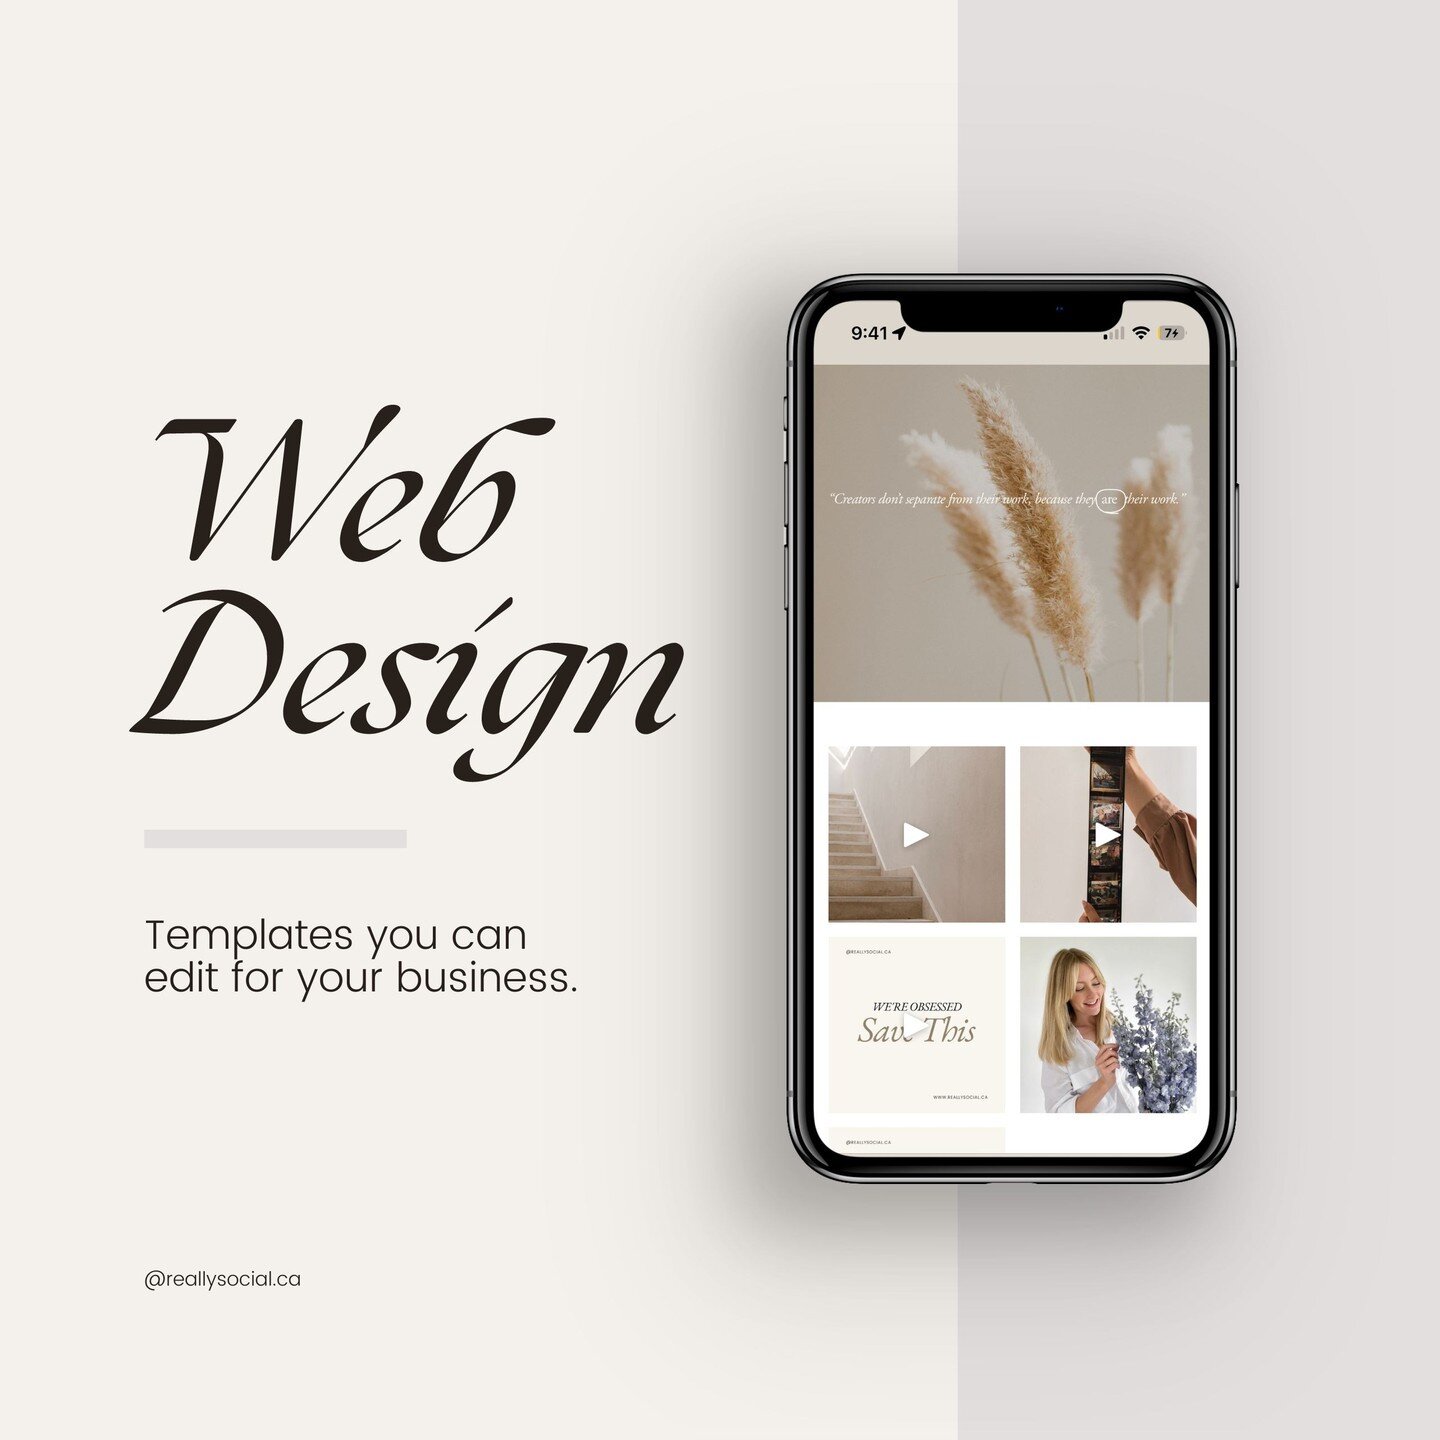 Level up your online presence with @reallysocial.ca's minimalist + efficient web design services! 👀

Let us bring your vision to life and create a digital masterpiece that reflects your brand's unique identity 💡 We offer Squarespace web design pack